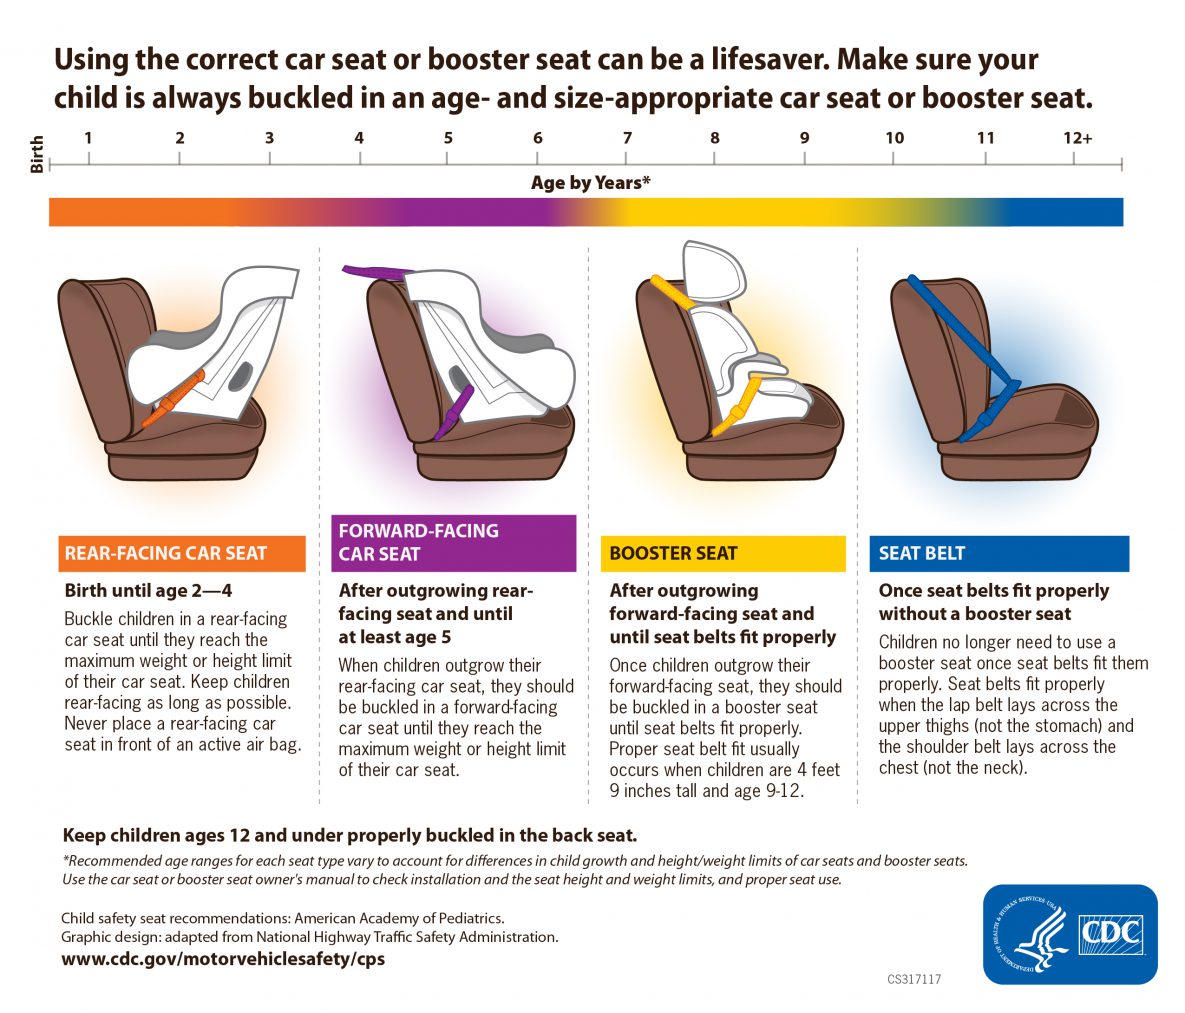 Child Sit In A Front Facing Car Seat, What S The Weight Limit For Forward Facing Car Seats